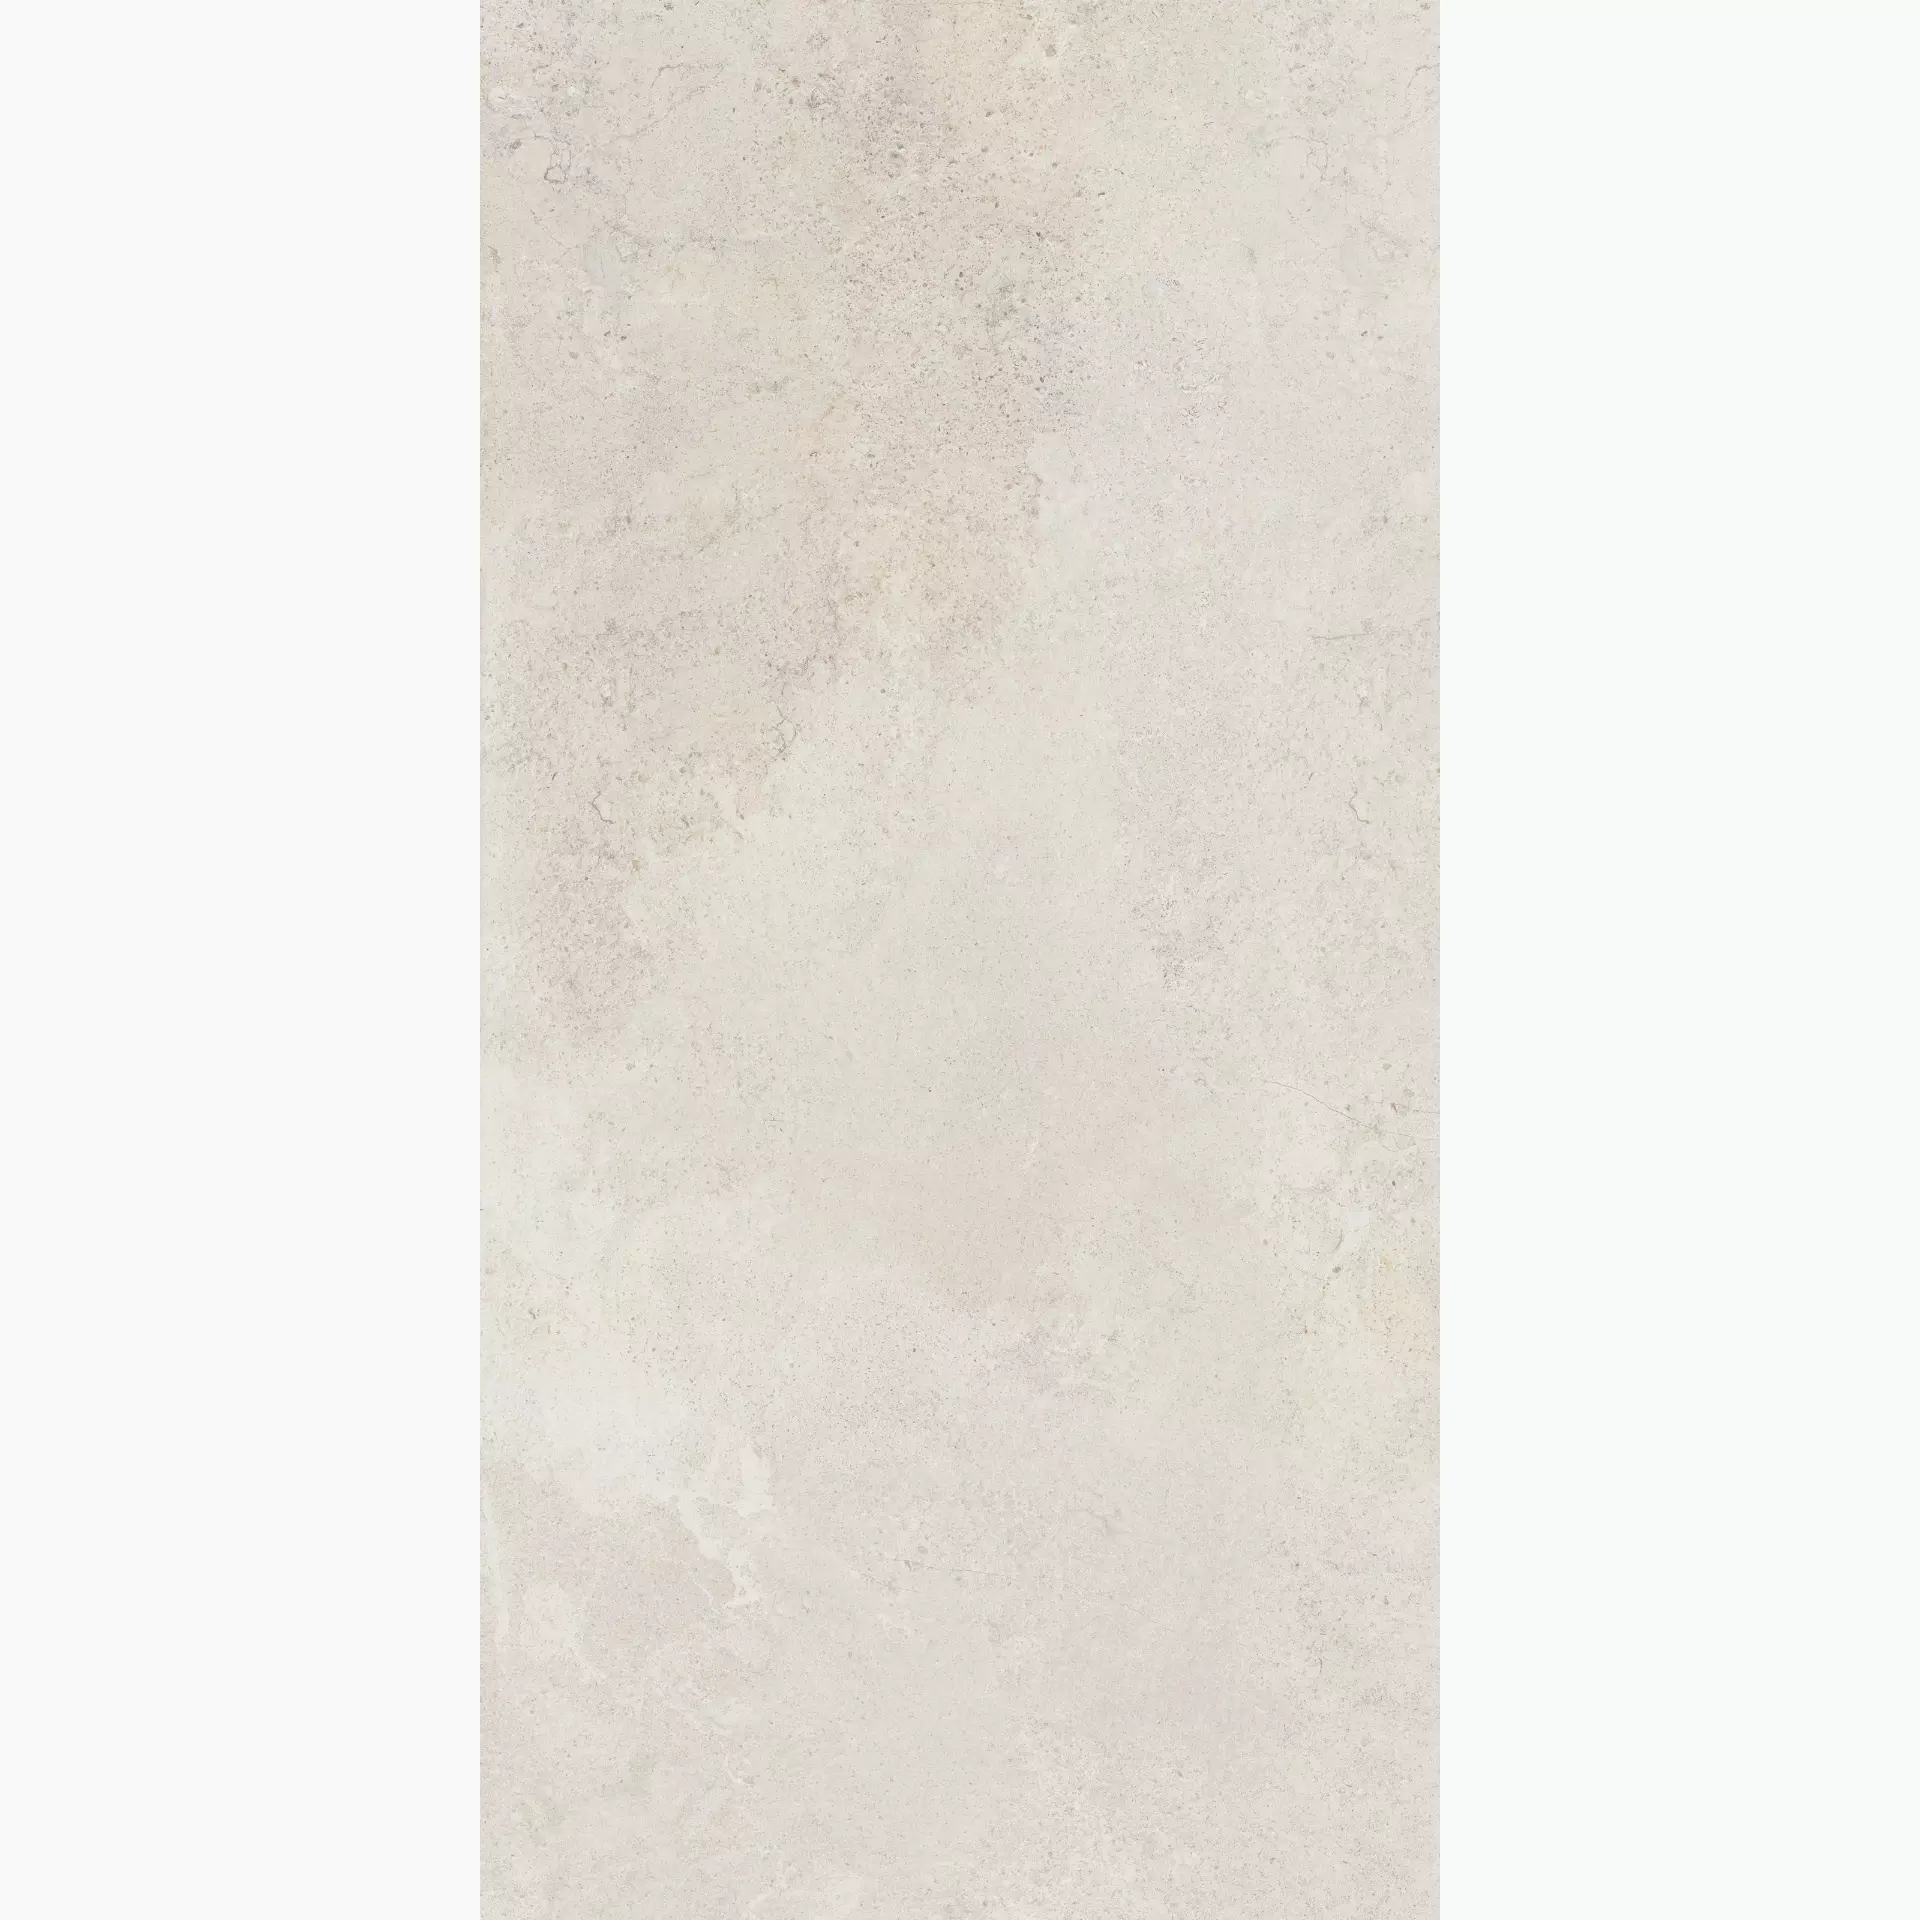 ABK Alpes Wide Ivory Naturale PF60000203 80x160cm rectified 8,5mm